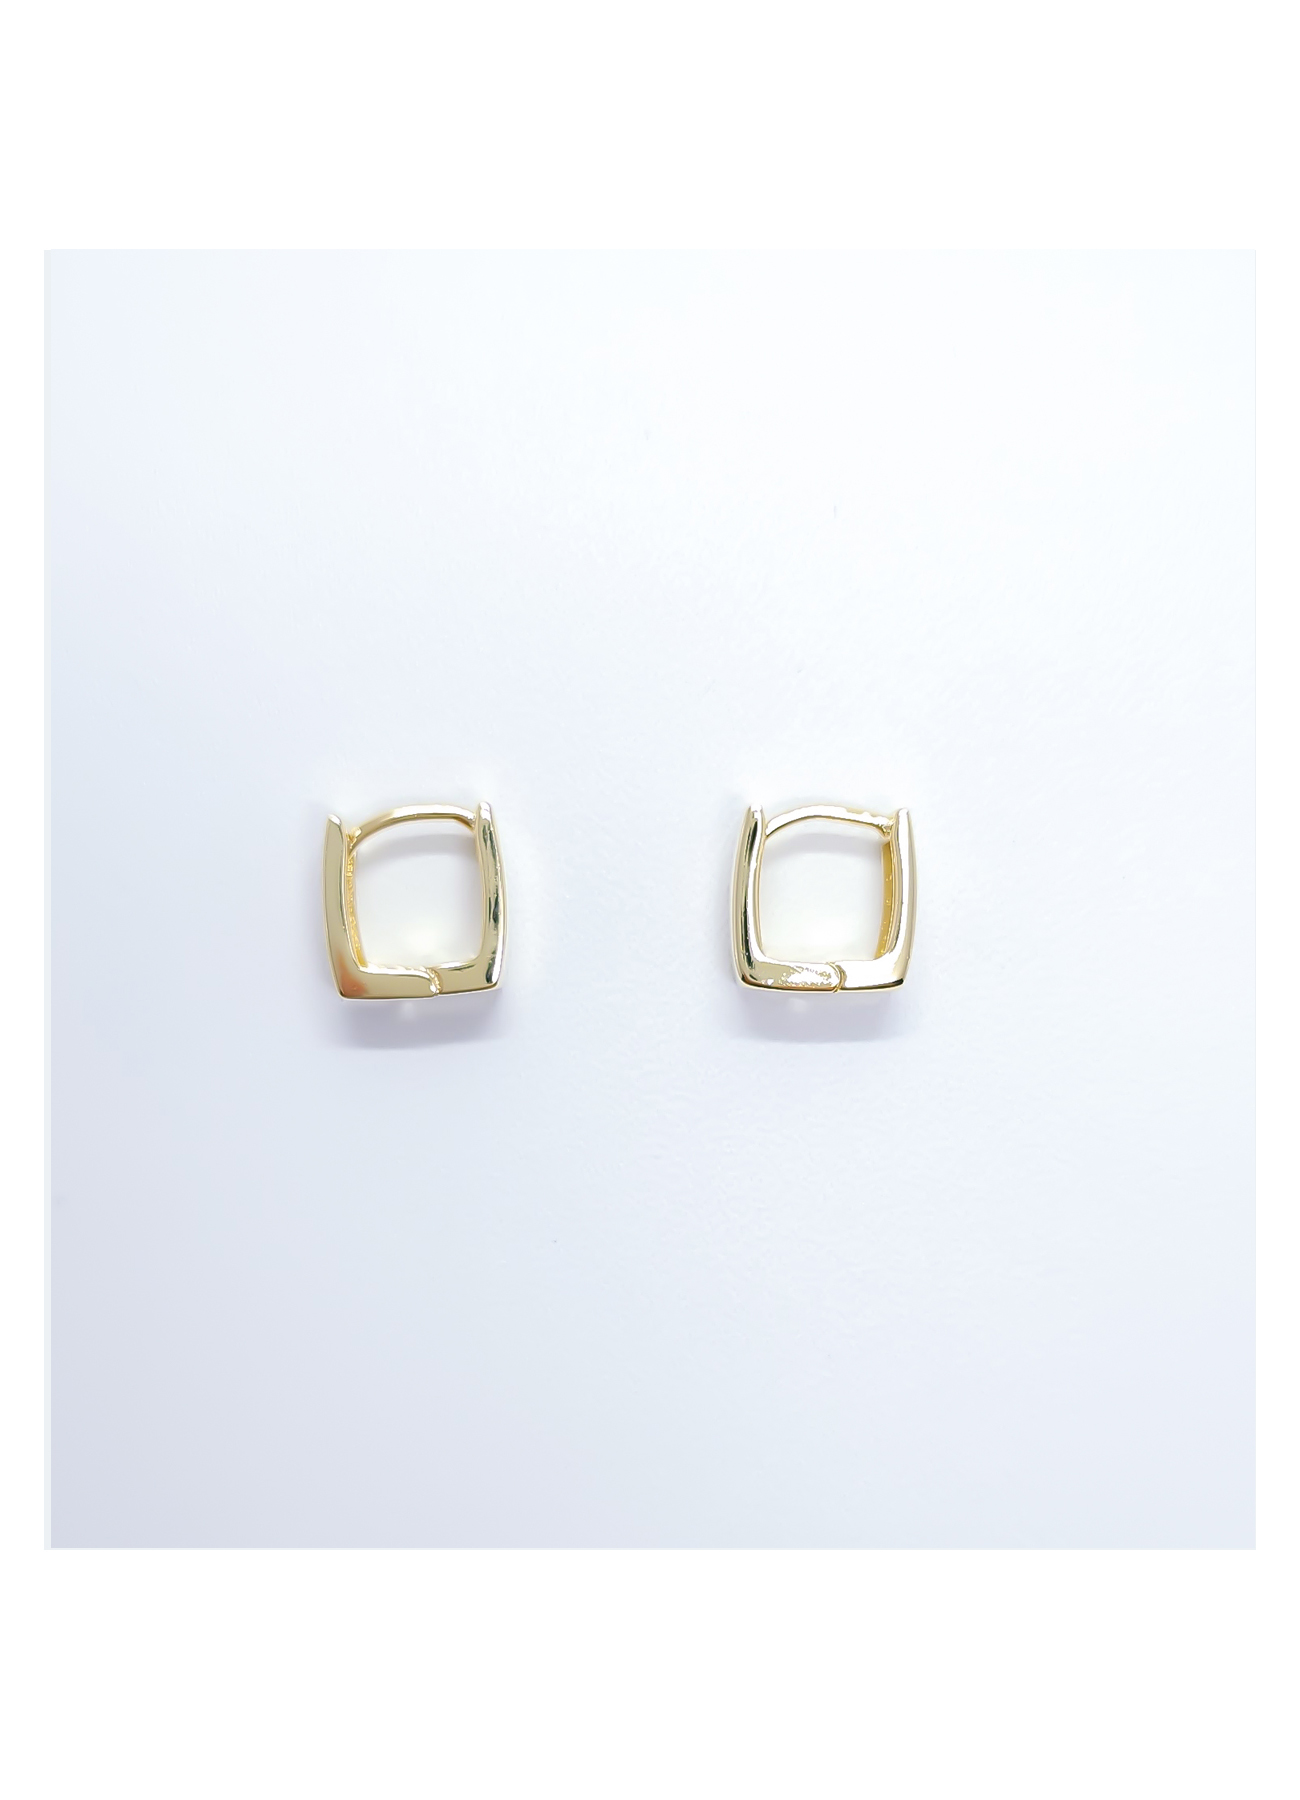 05e - Daily square one-touch ring earrings 데일리 사각 원터치 링귀걸이